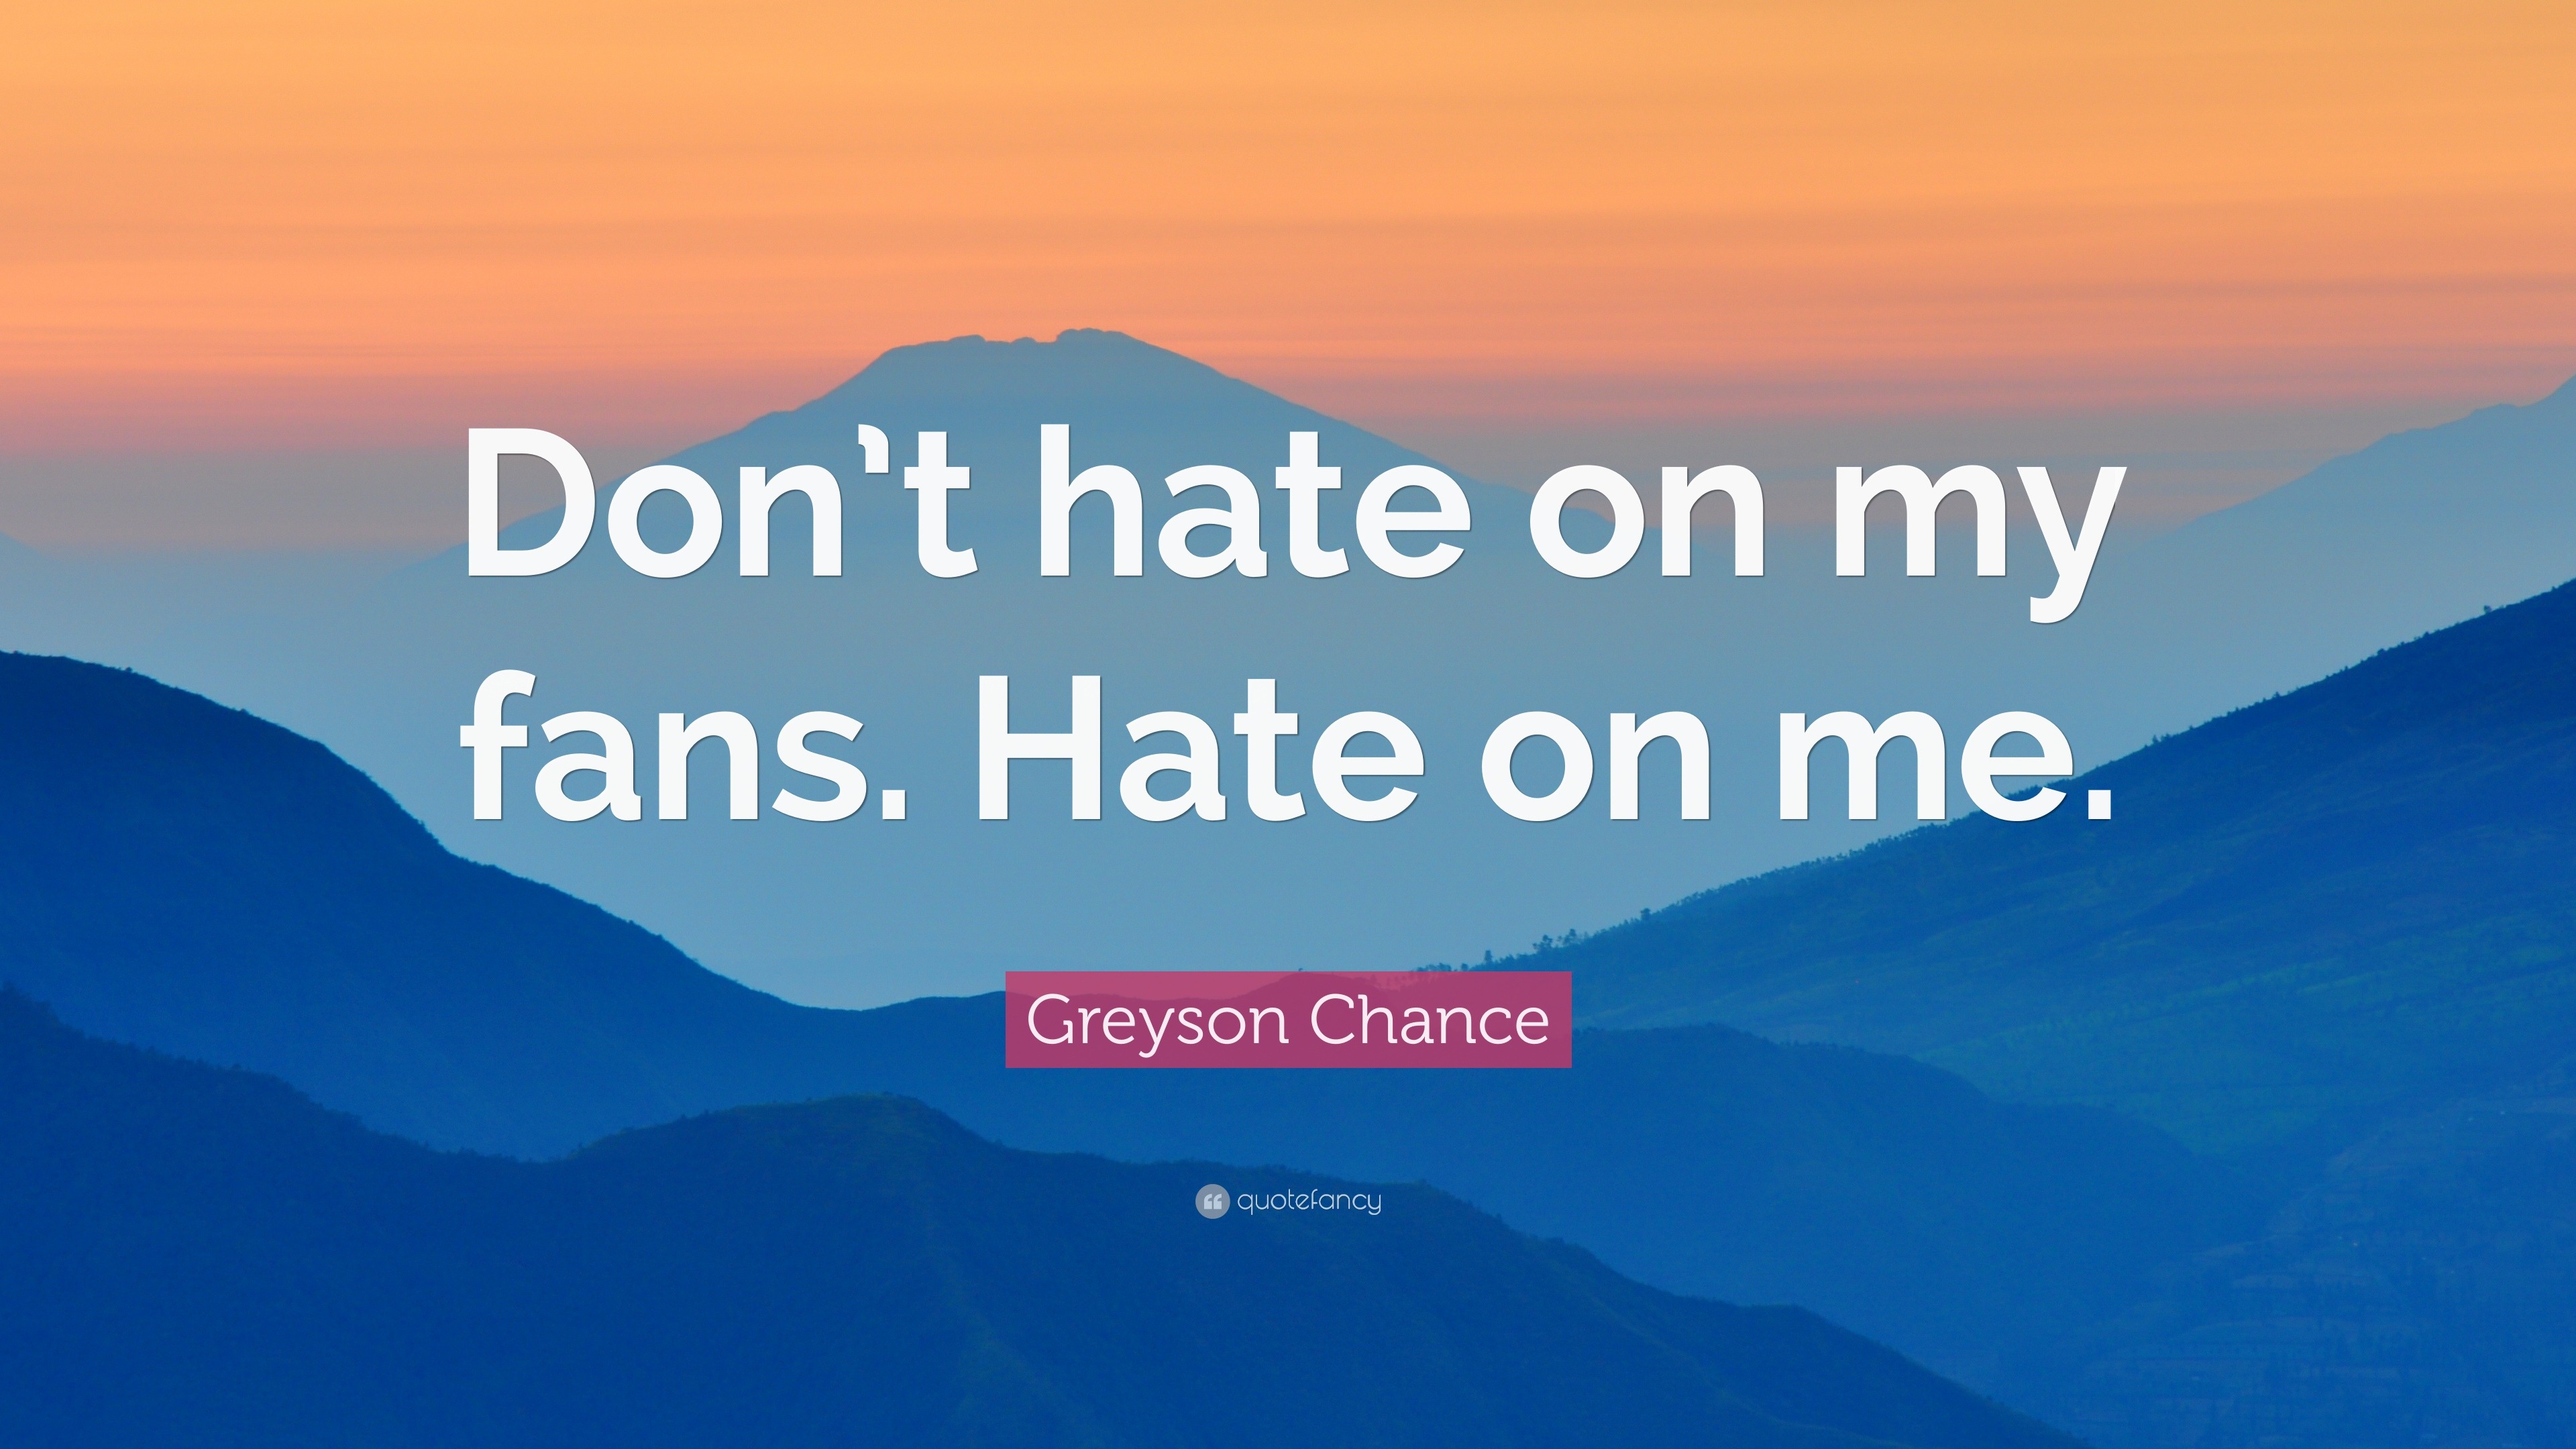 Greyson Chance Quotes (46 wallpapers) - Quotefancy